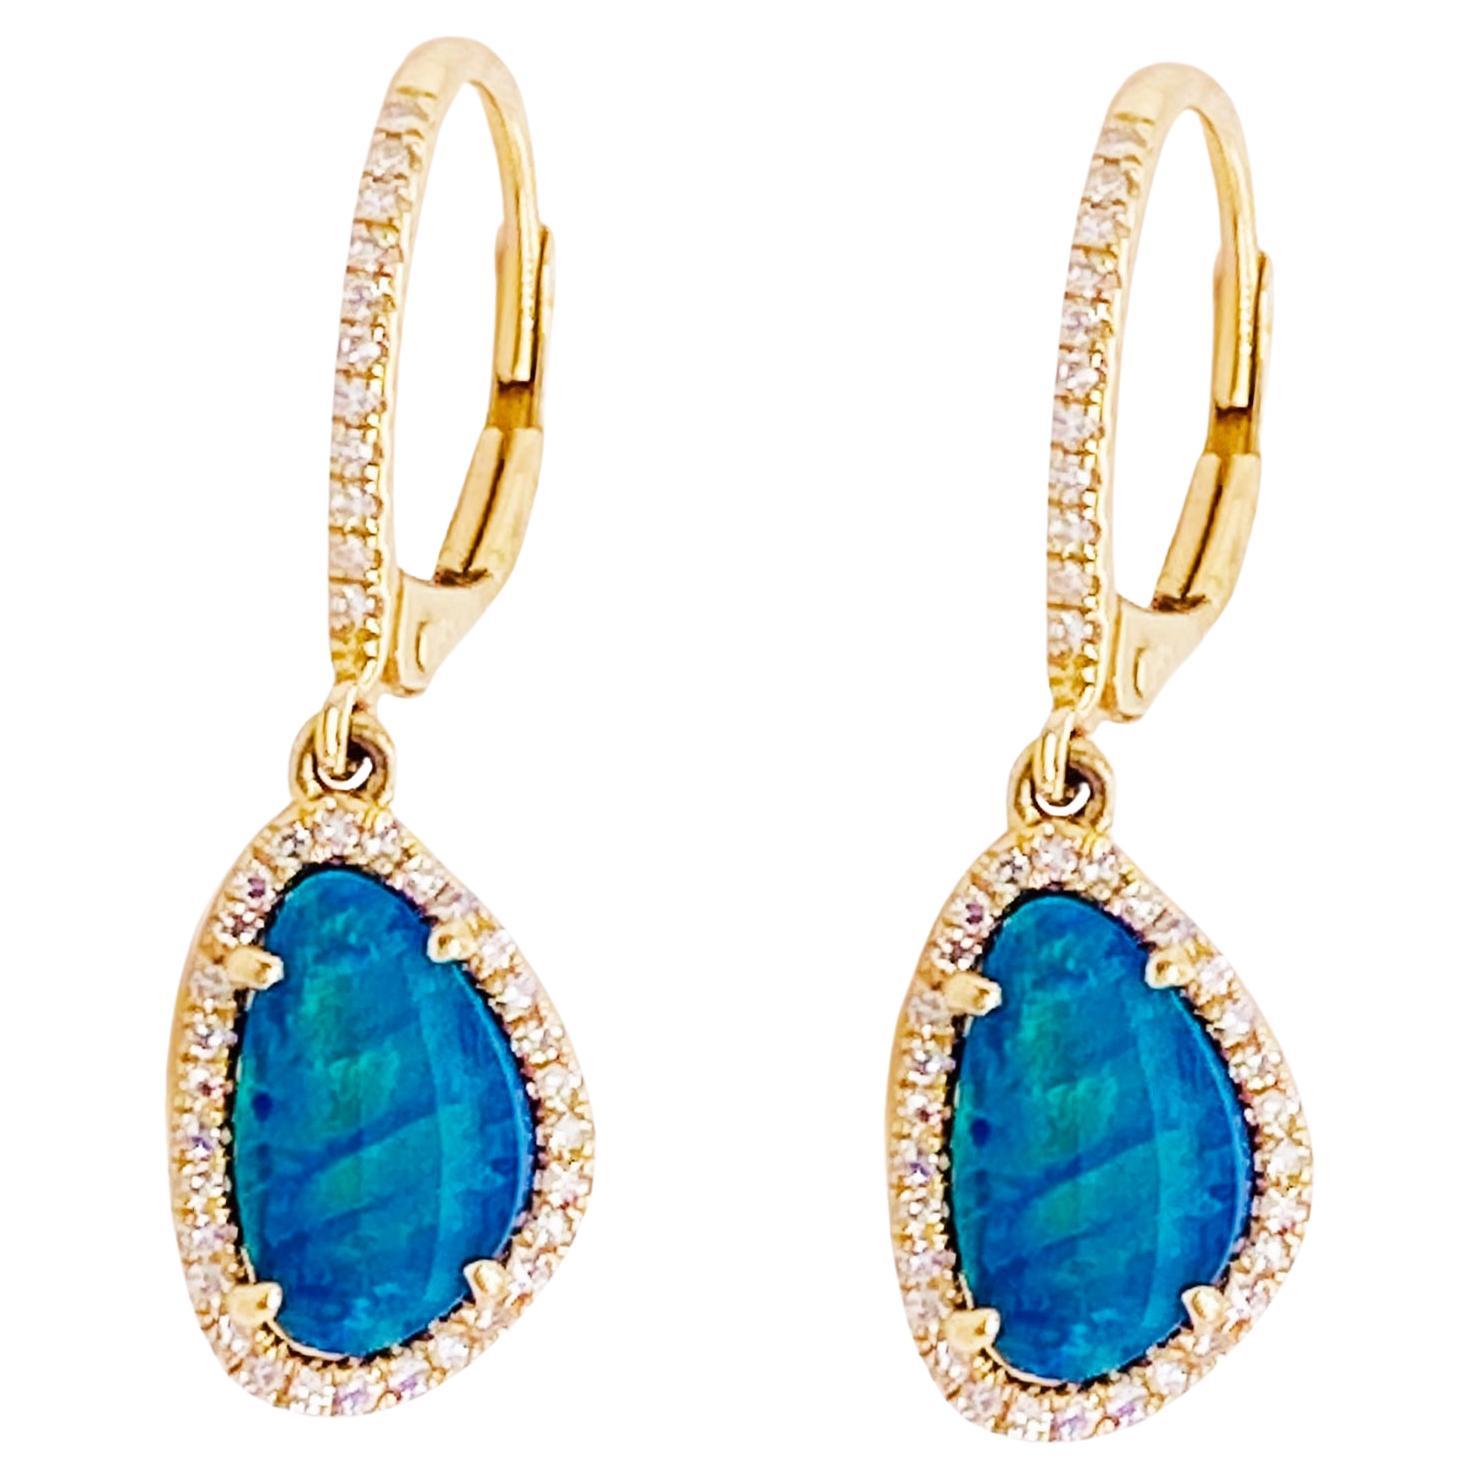 14K Yellow Gold Oval Opal Cabochon Screw Back Earrings, Circa 1960 -  Colonial Trading Company